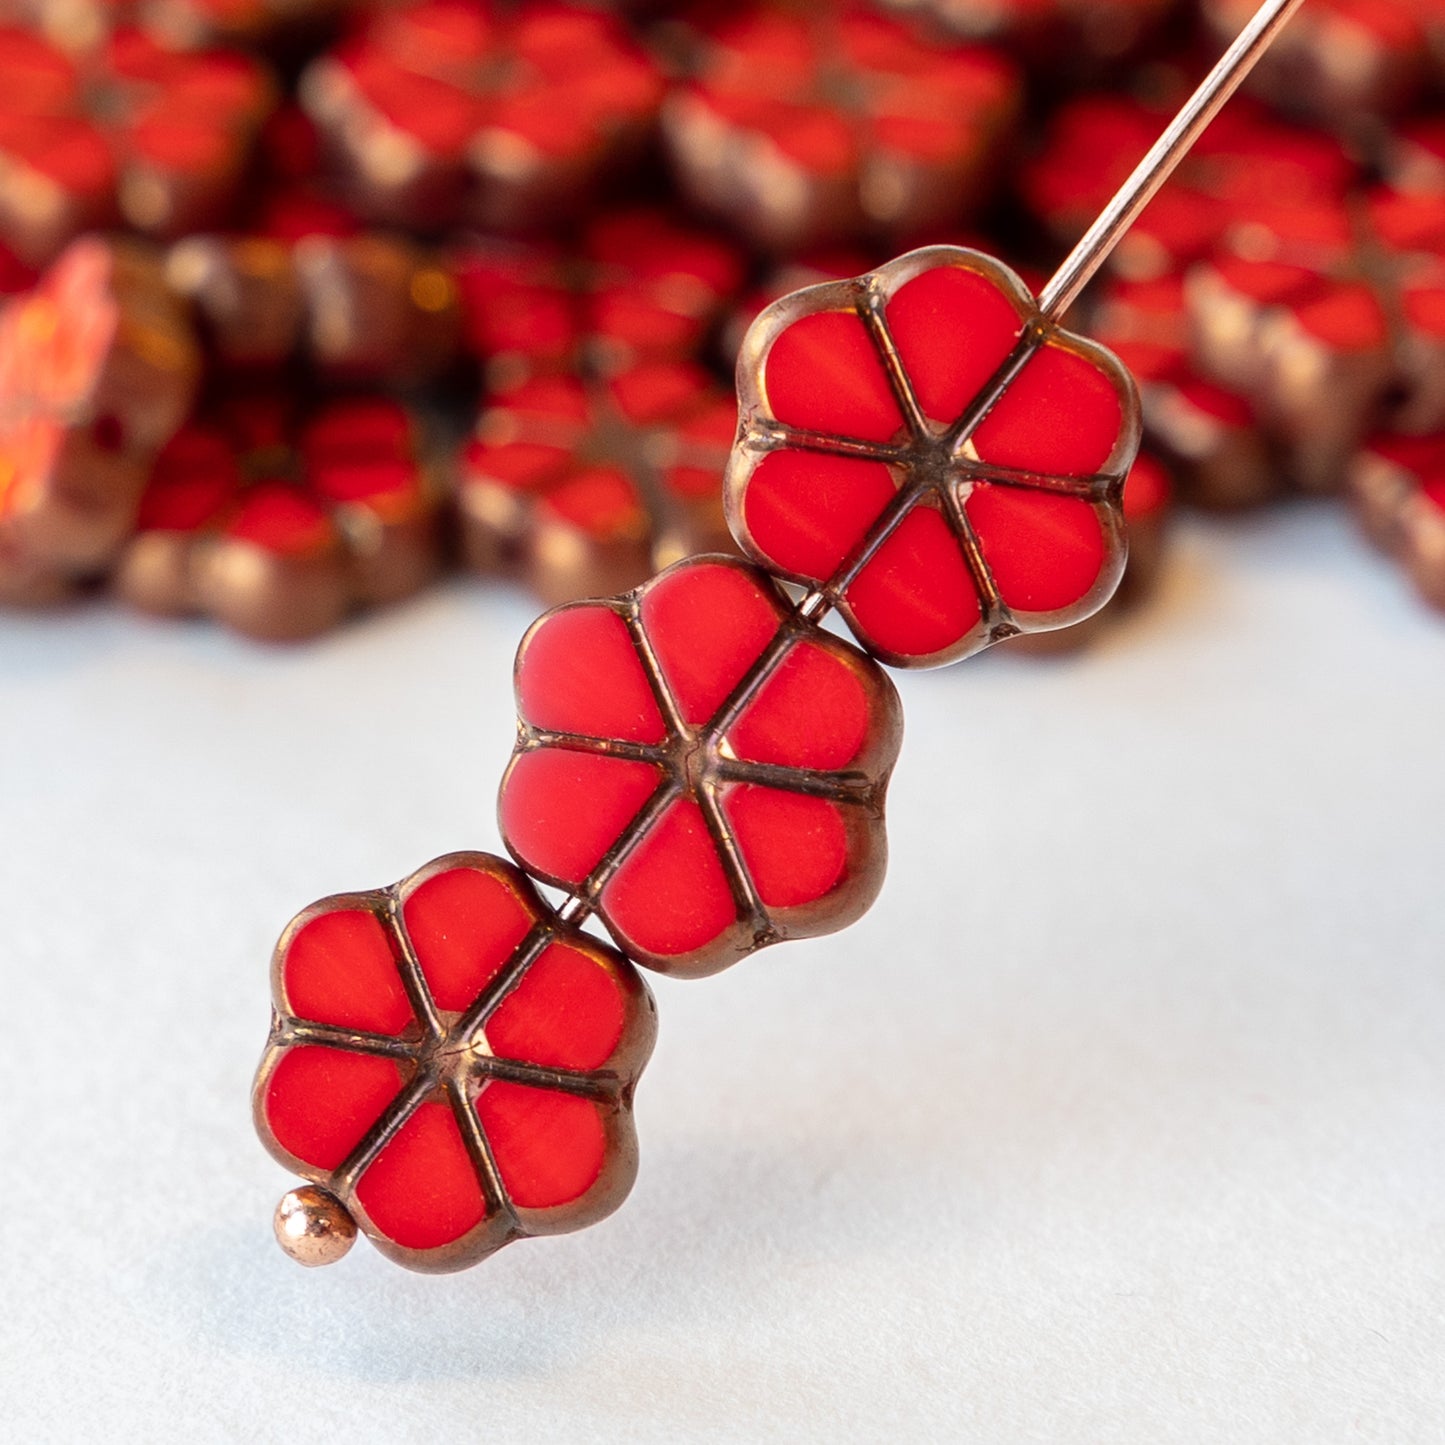 10mm Forget Me Not Flower Beads - Opaque Red with Bronze Wash - 10 Beads